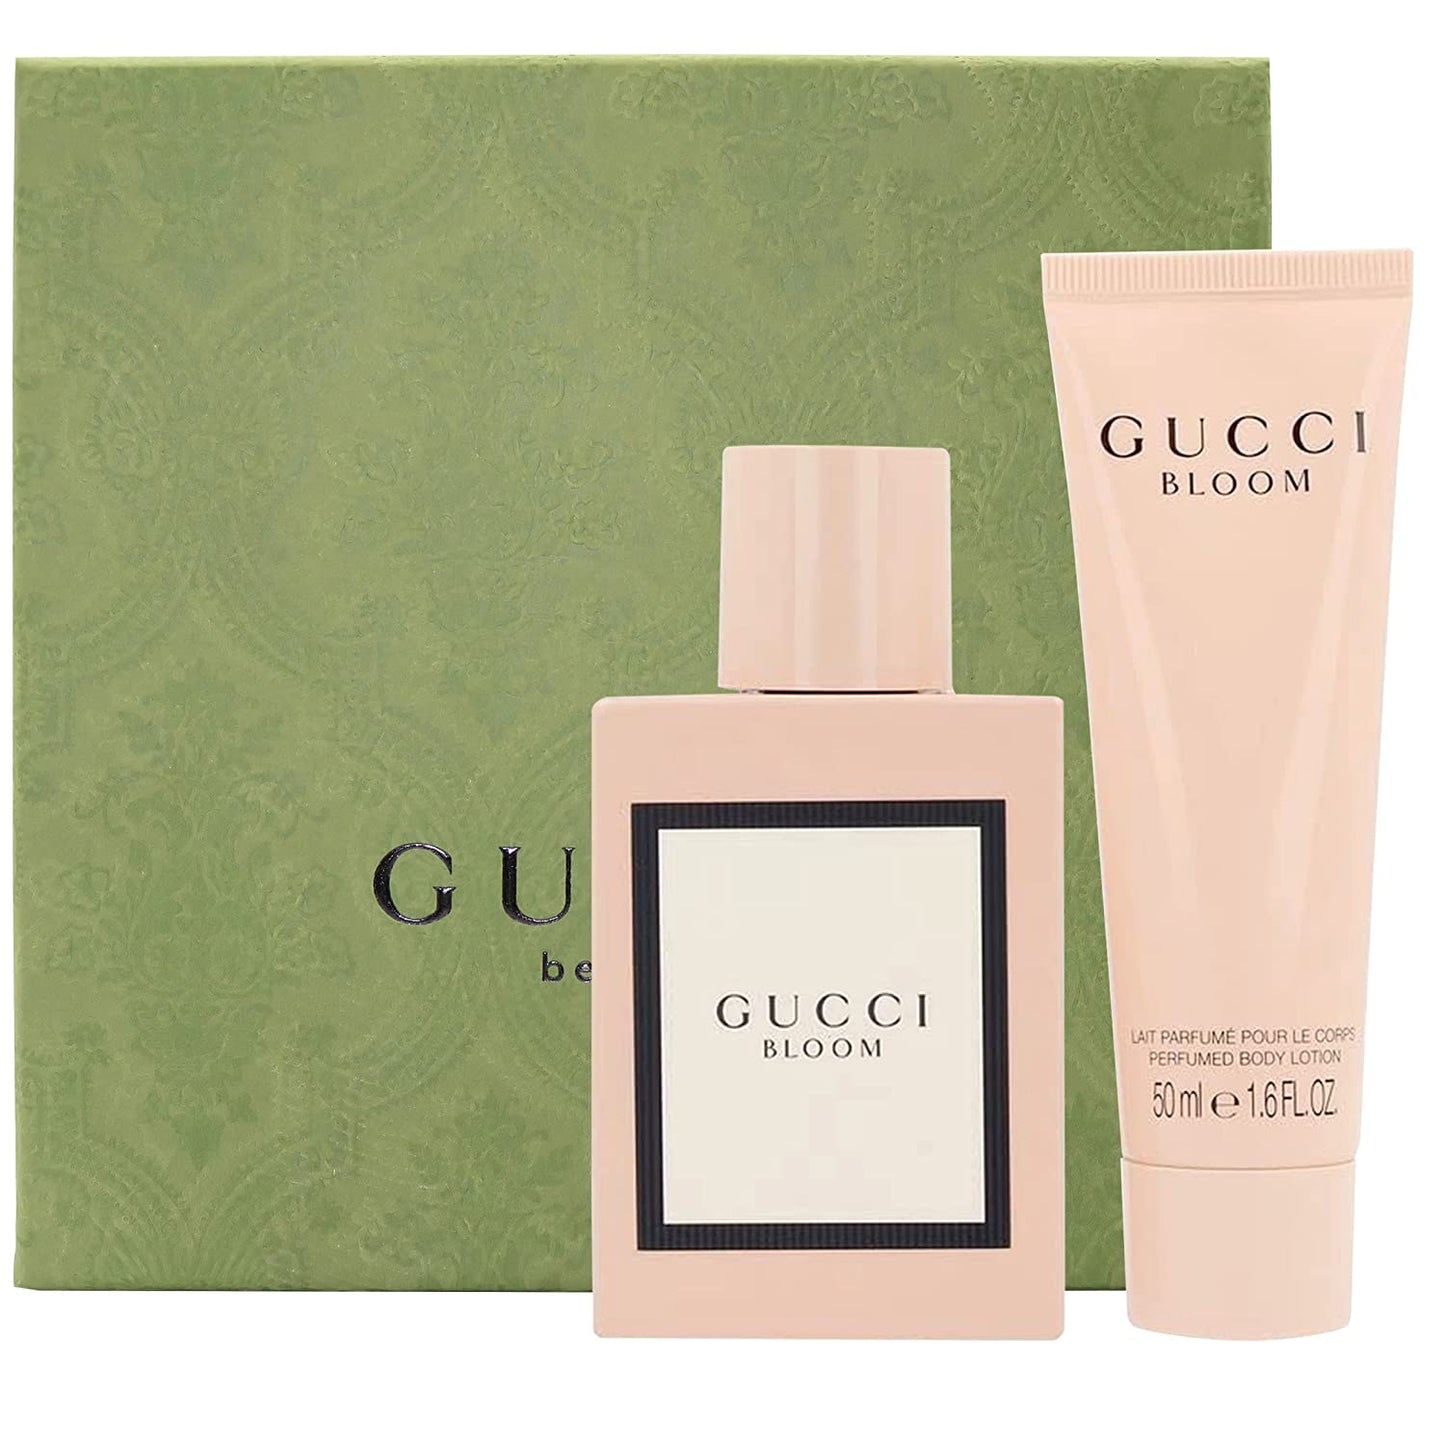 Gucci Bloom Eau De Parfum and Scented Lotion Gift Set Perfume for Women 1.6 oz and Perfumed Lotion for Women 1.6 oz